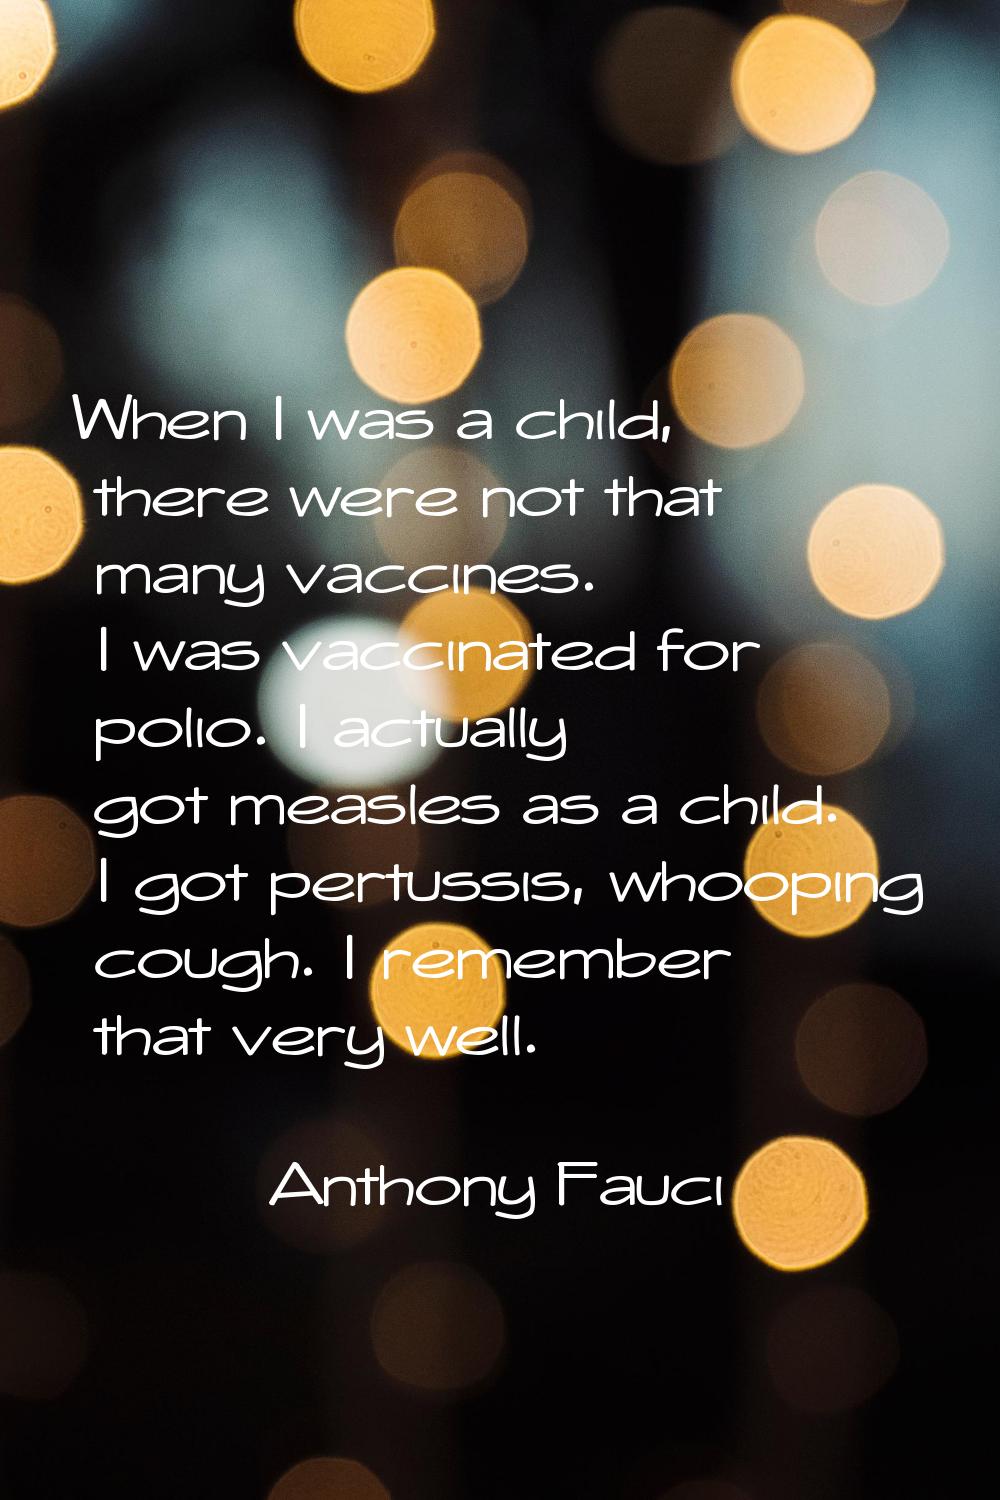 When I was a child, there were not that many vaccines. I was vaccinated for polio. I actually got m